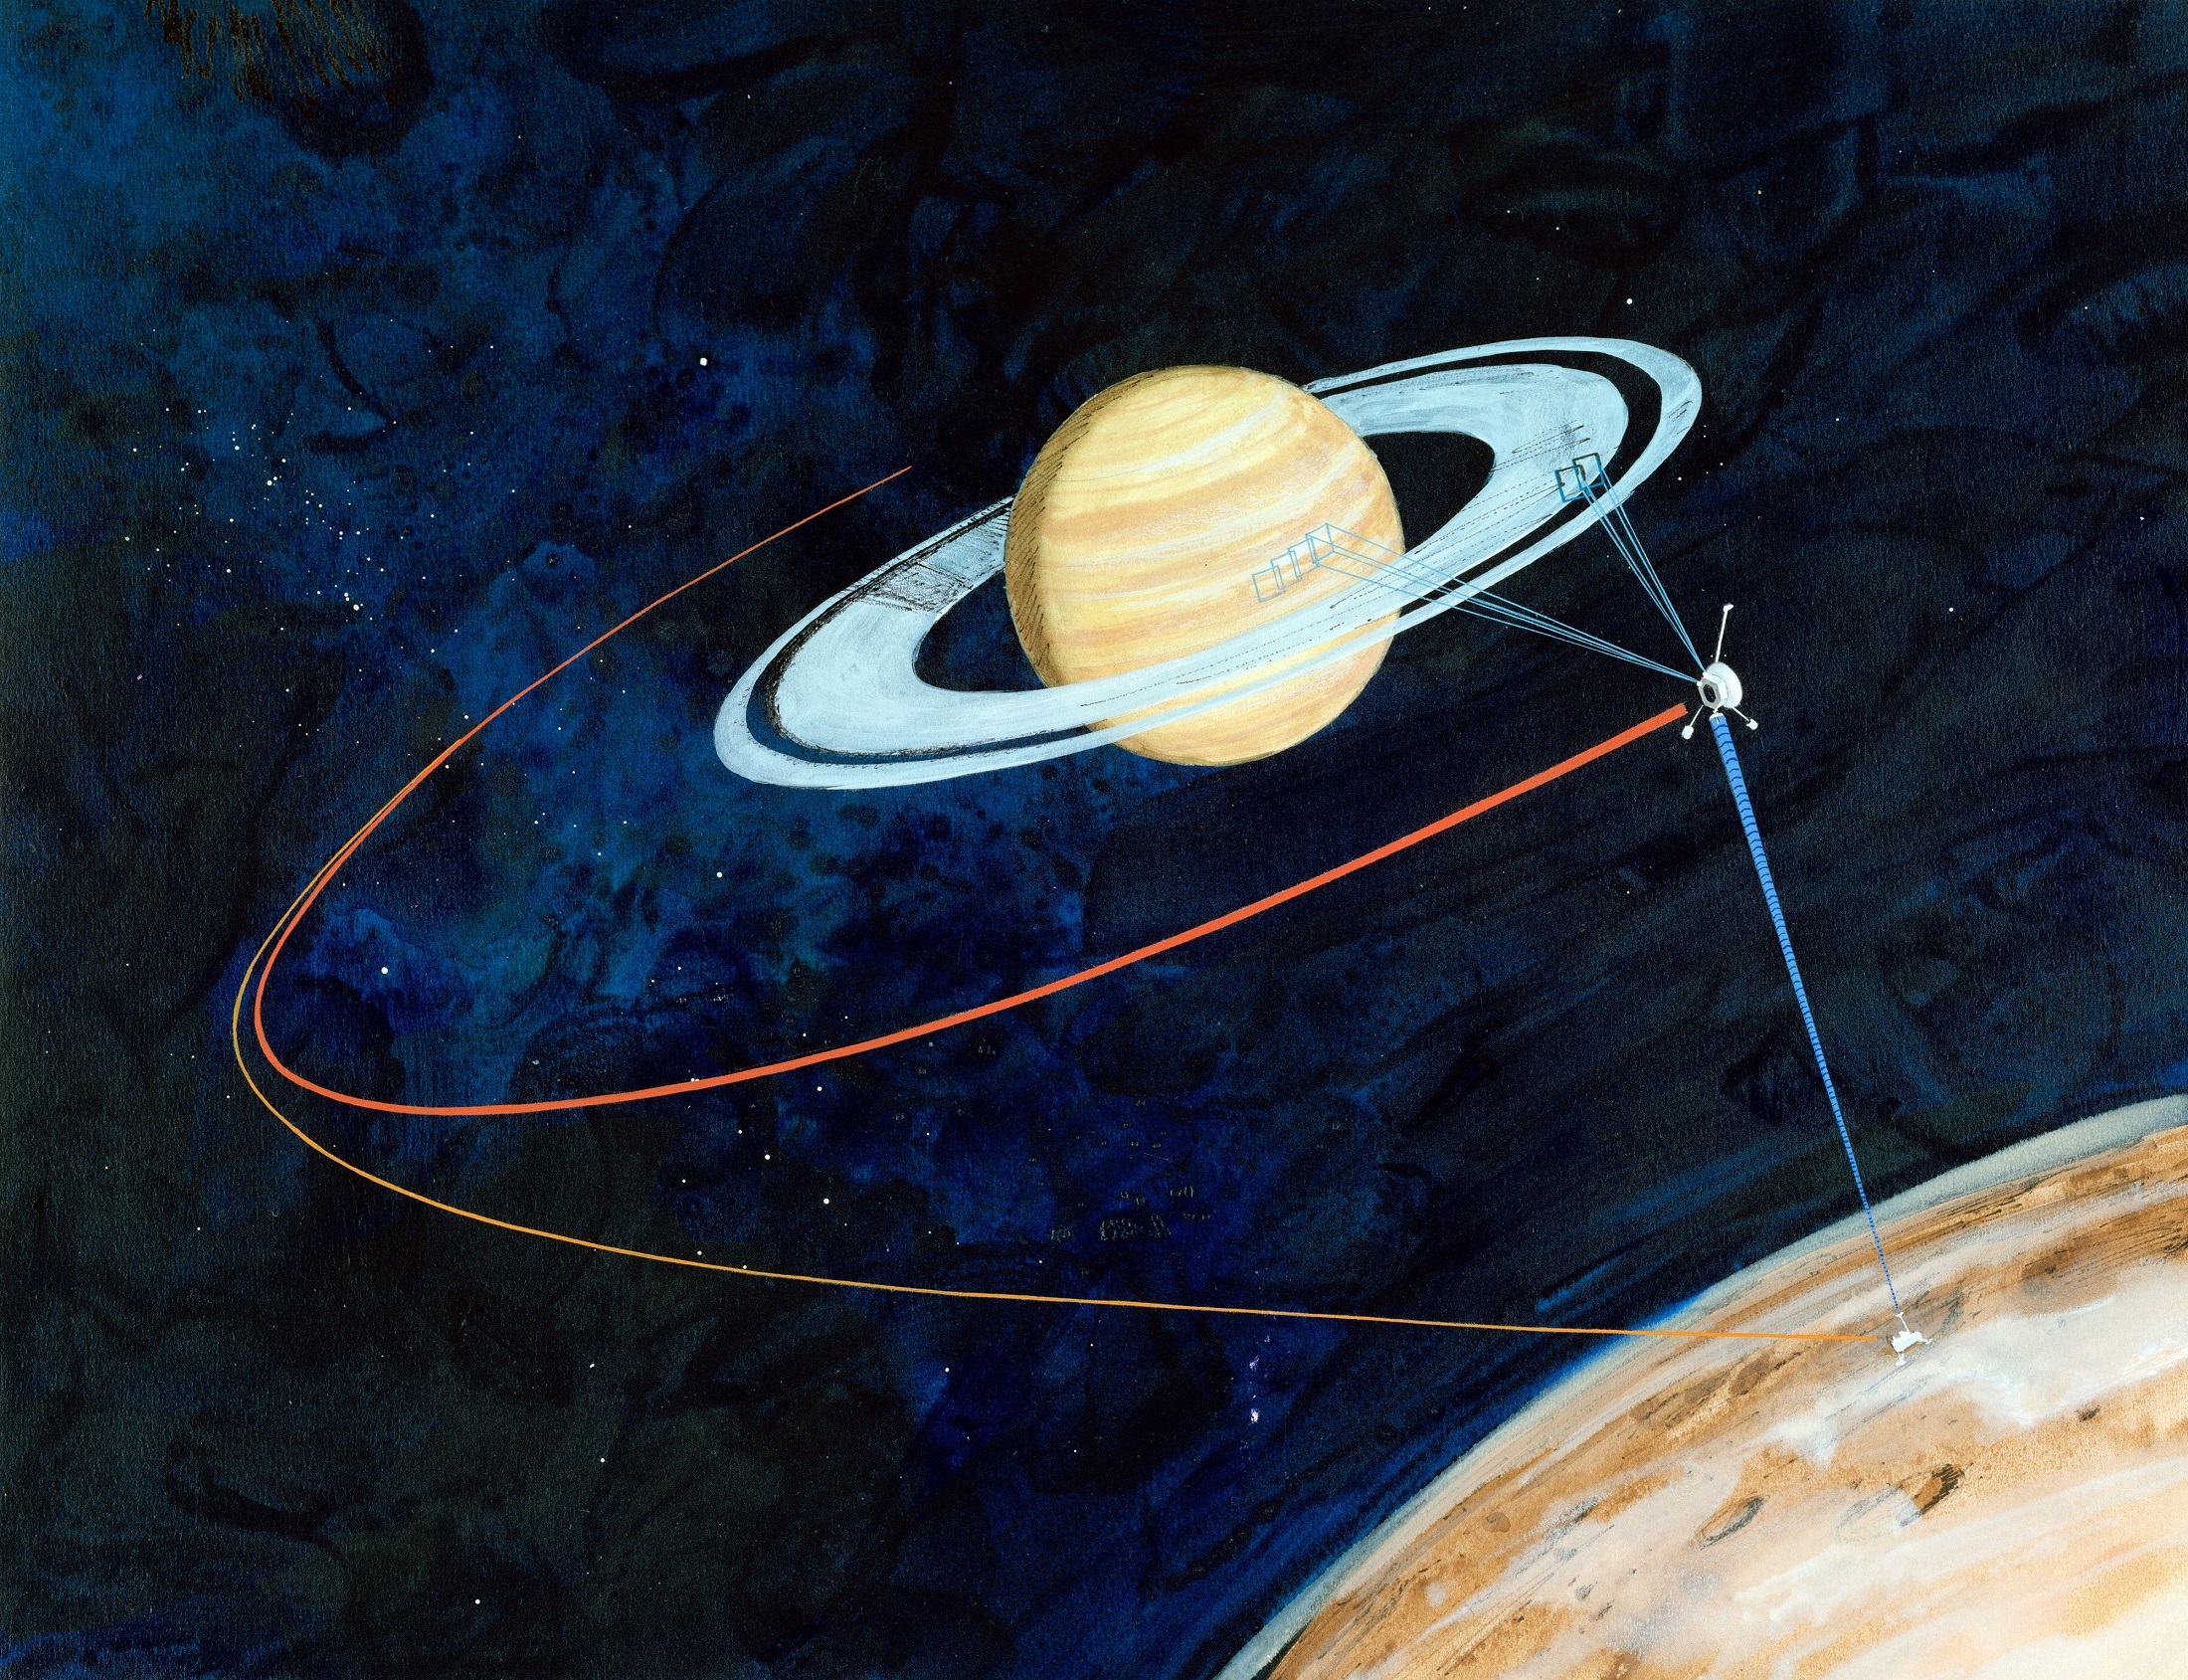 Painting of spacecraft and lander exploring Saturn and Titan.